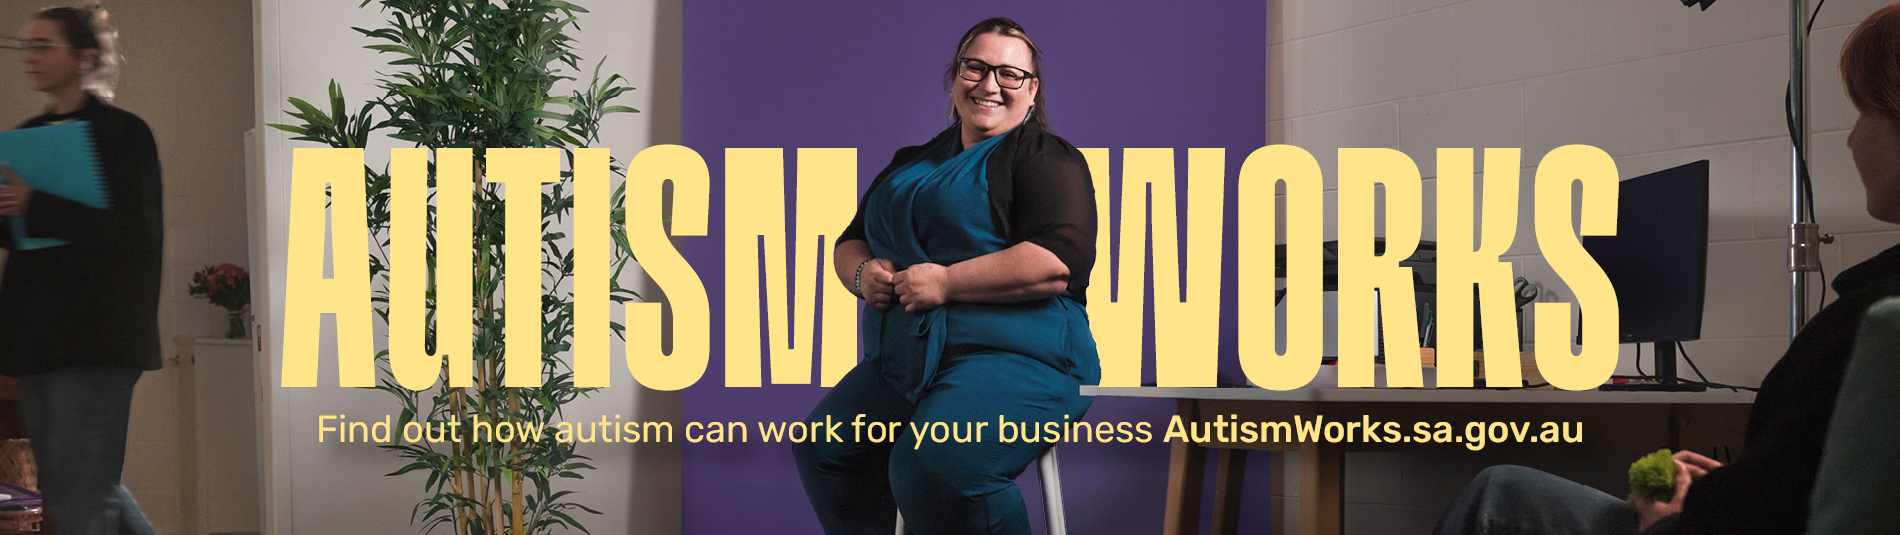 Autism Works - Find out how autism can work for your business autismworks.sa.gov.au